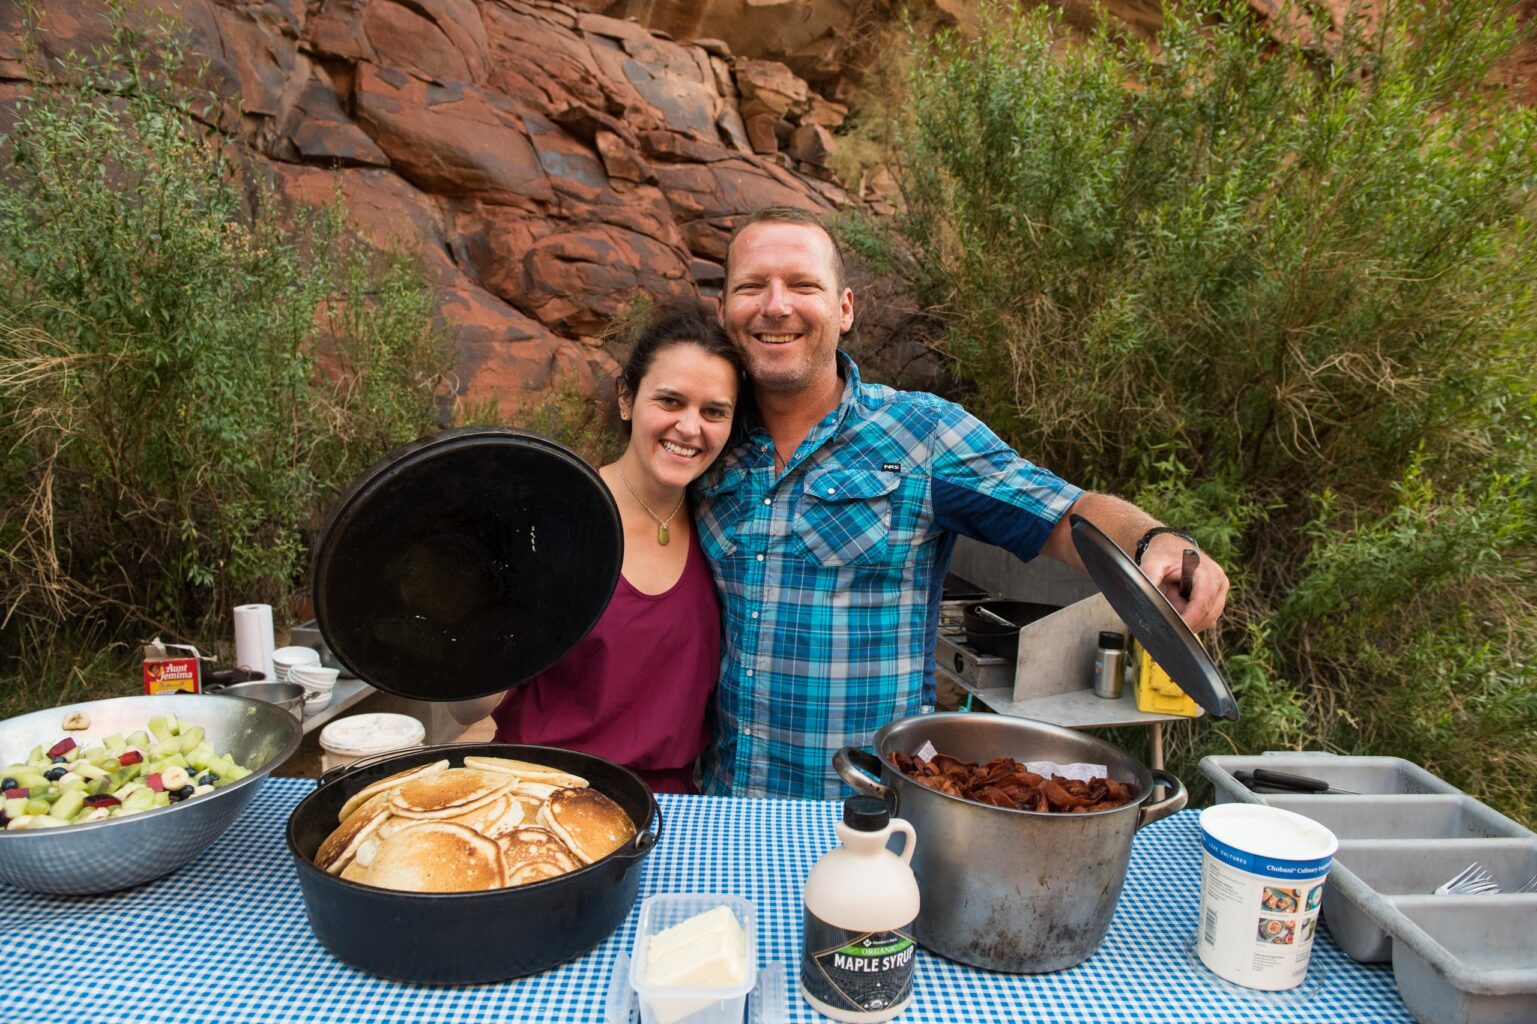 Showing off breakfast during an OARS Grand Canyon trip